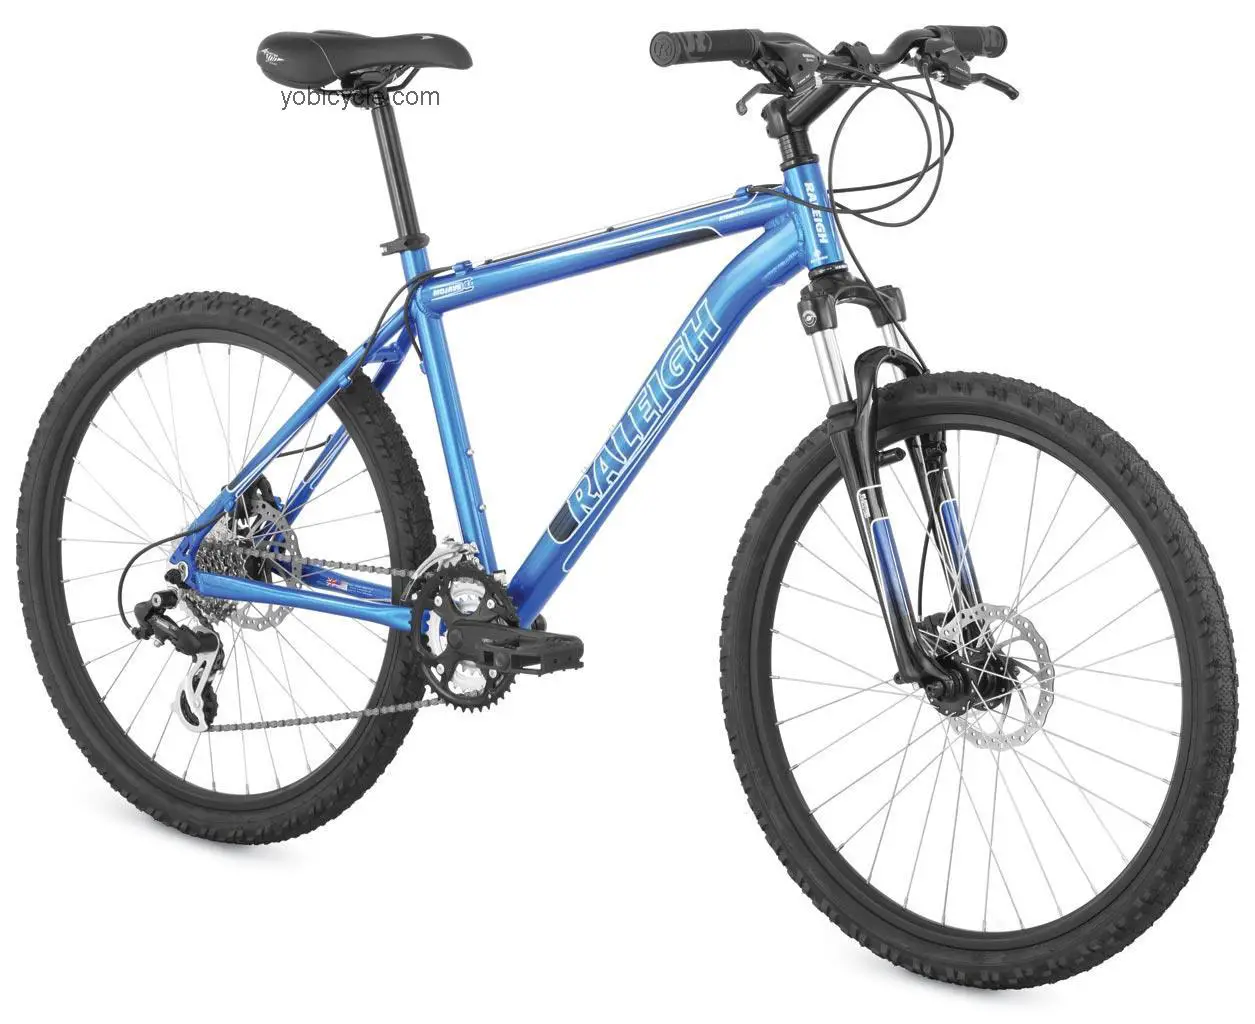 Raleigh Mojave 4.0 2009 comparison online with competitors